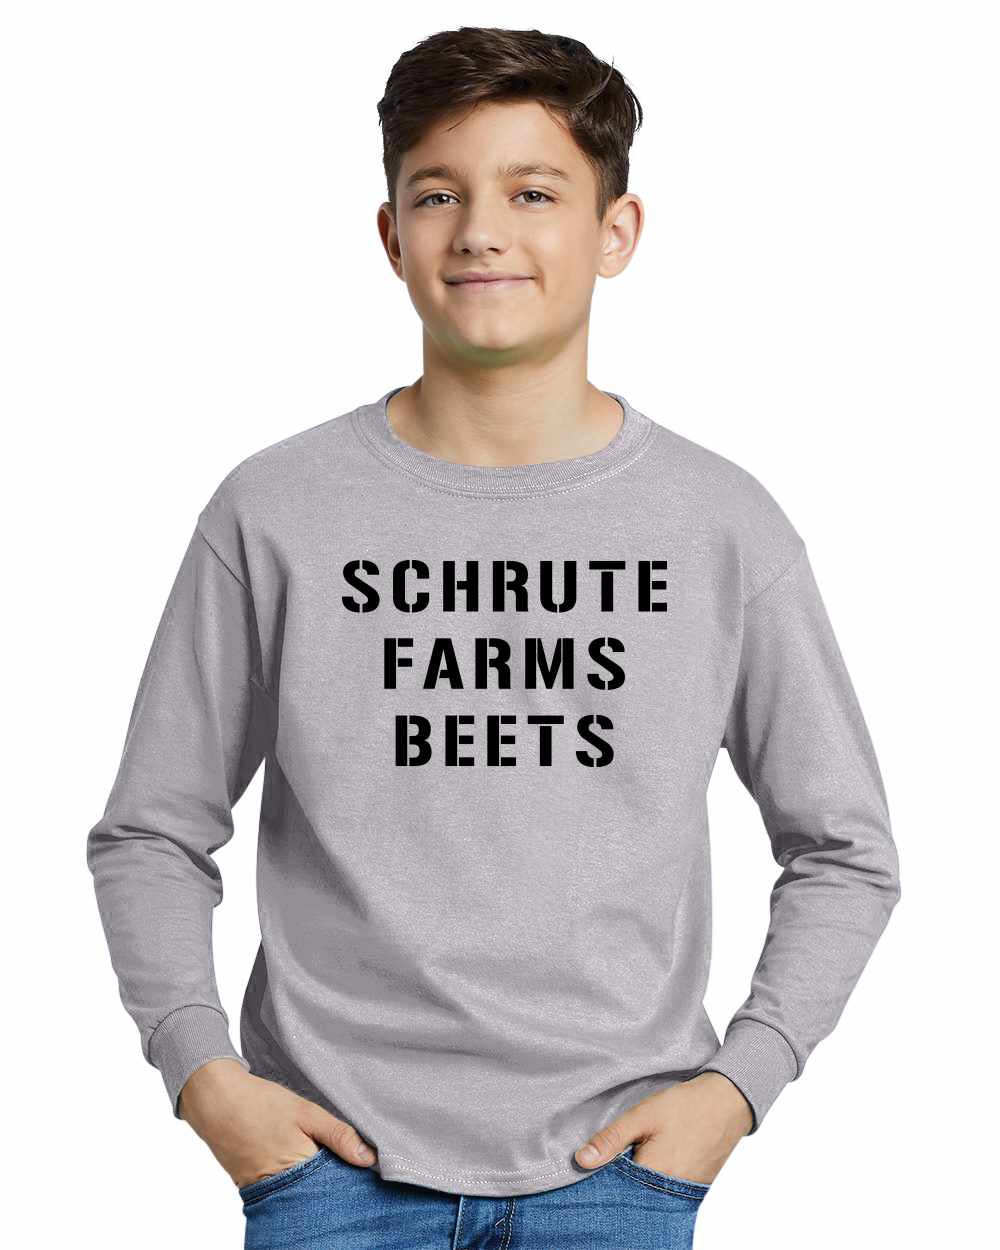 SCHRUTE FARMS BEETS on Youth Long Sleeve Shirt (#396-203)